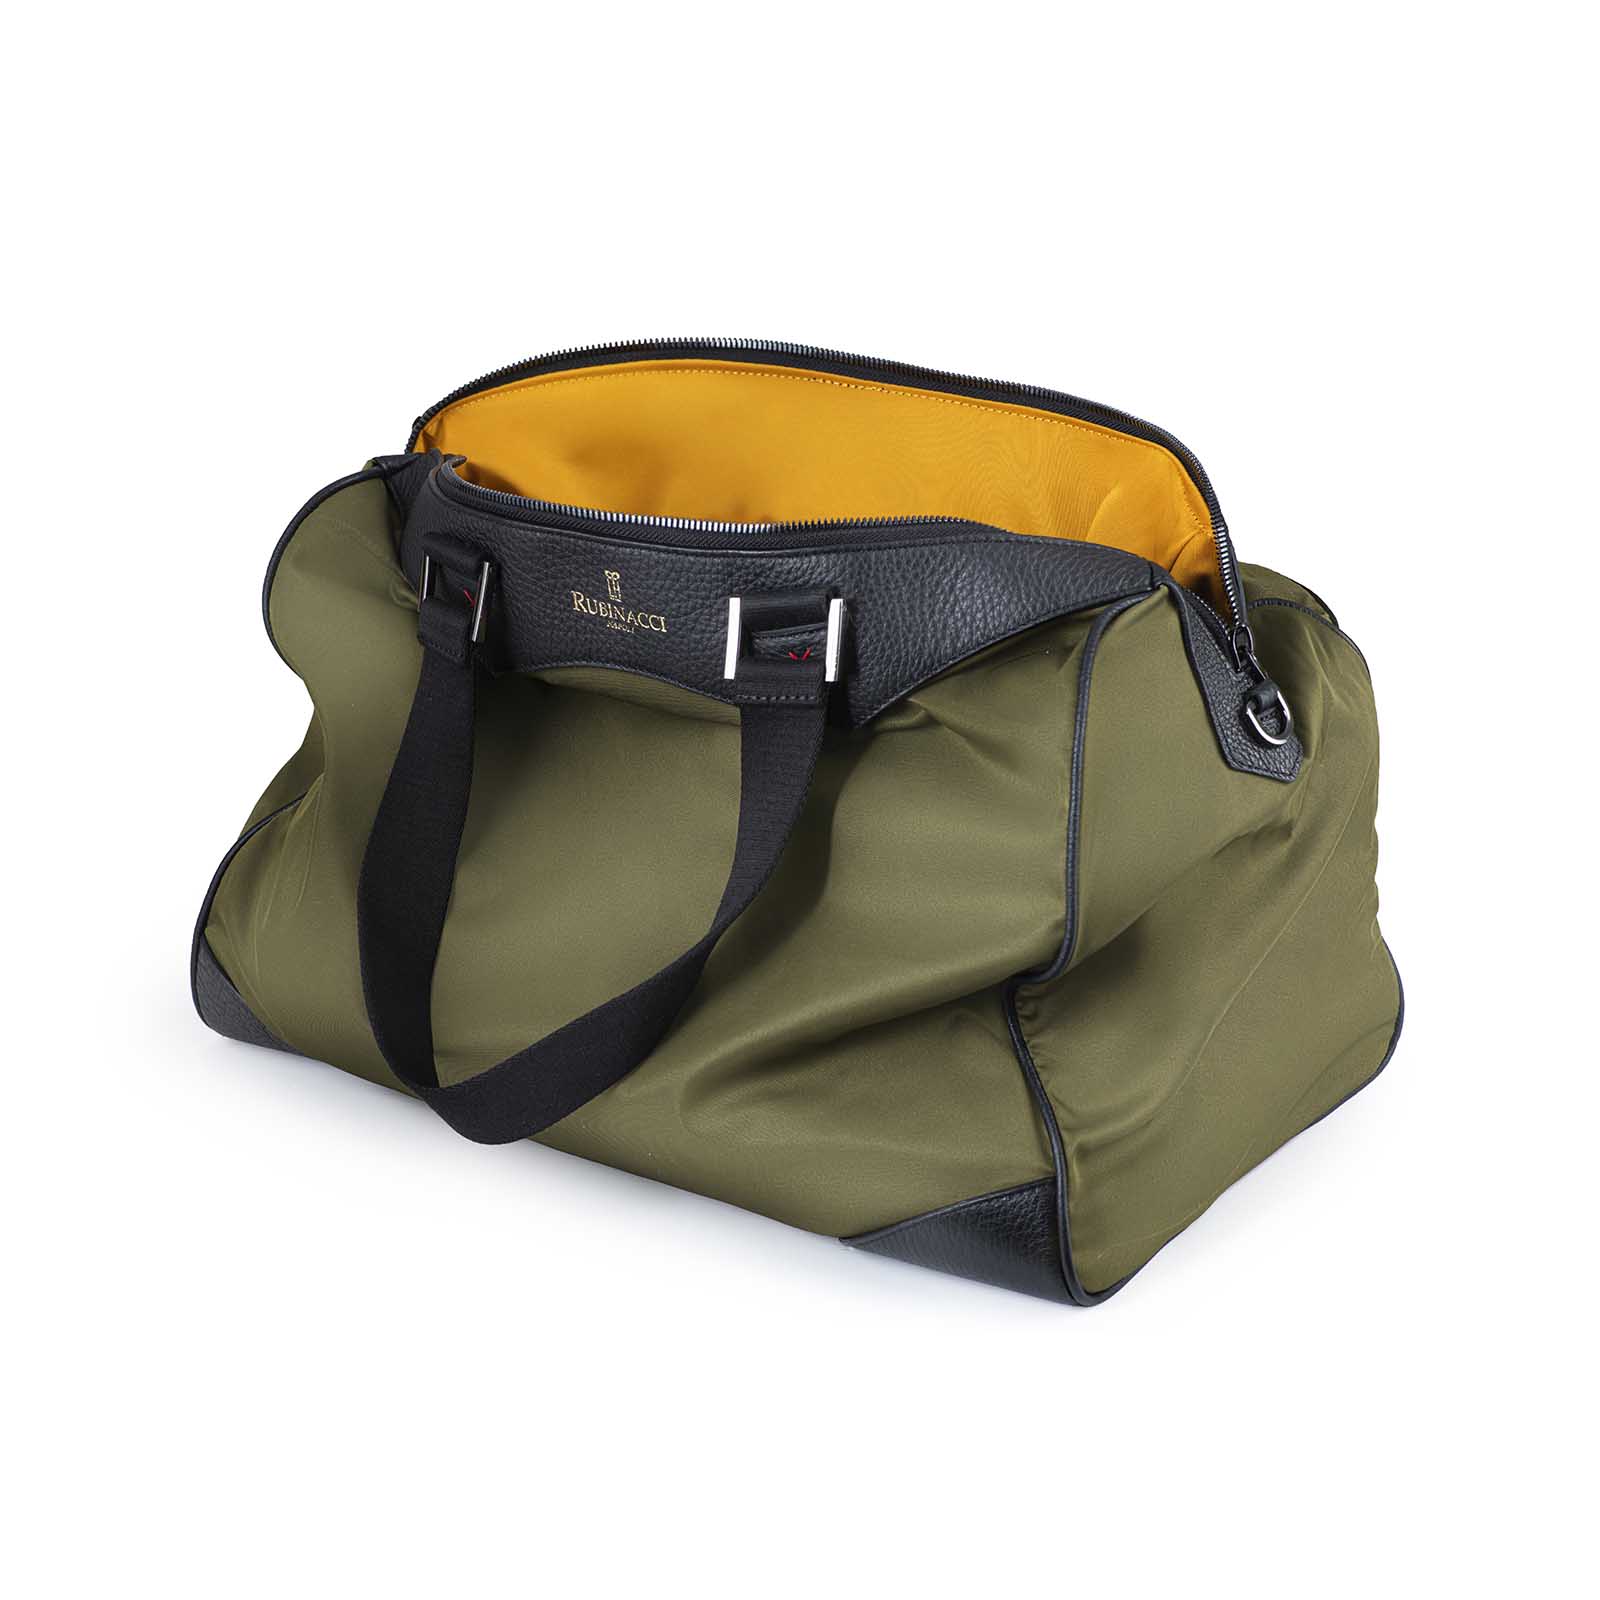 Mariano Rubinacci - Suit carrier in military green canvas